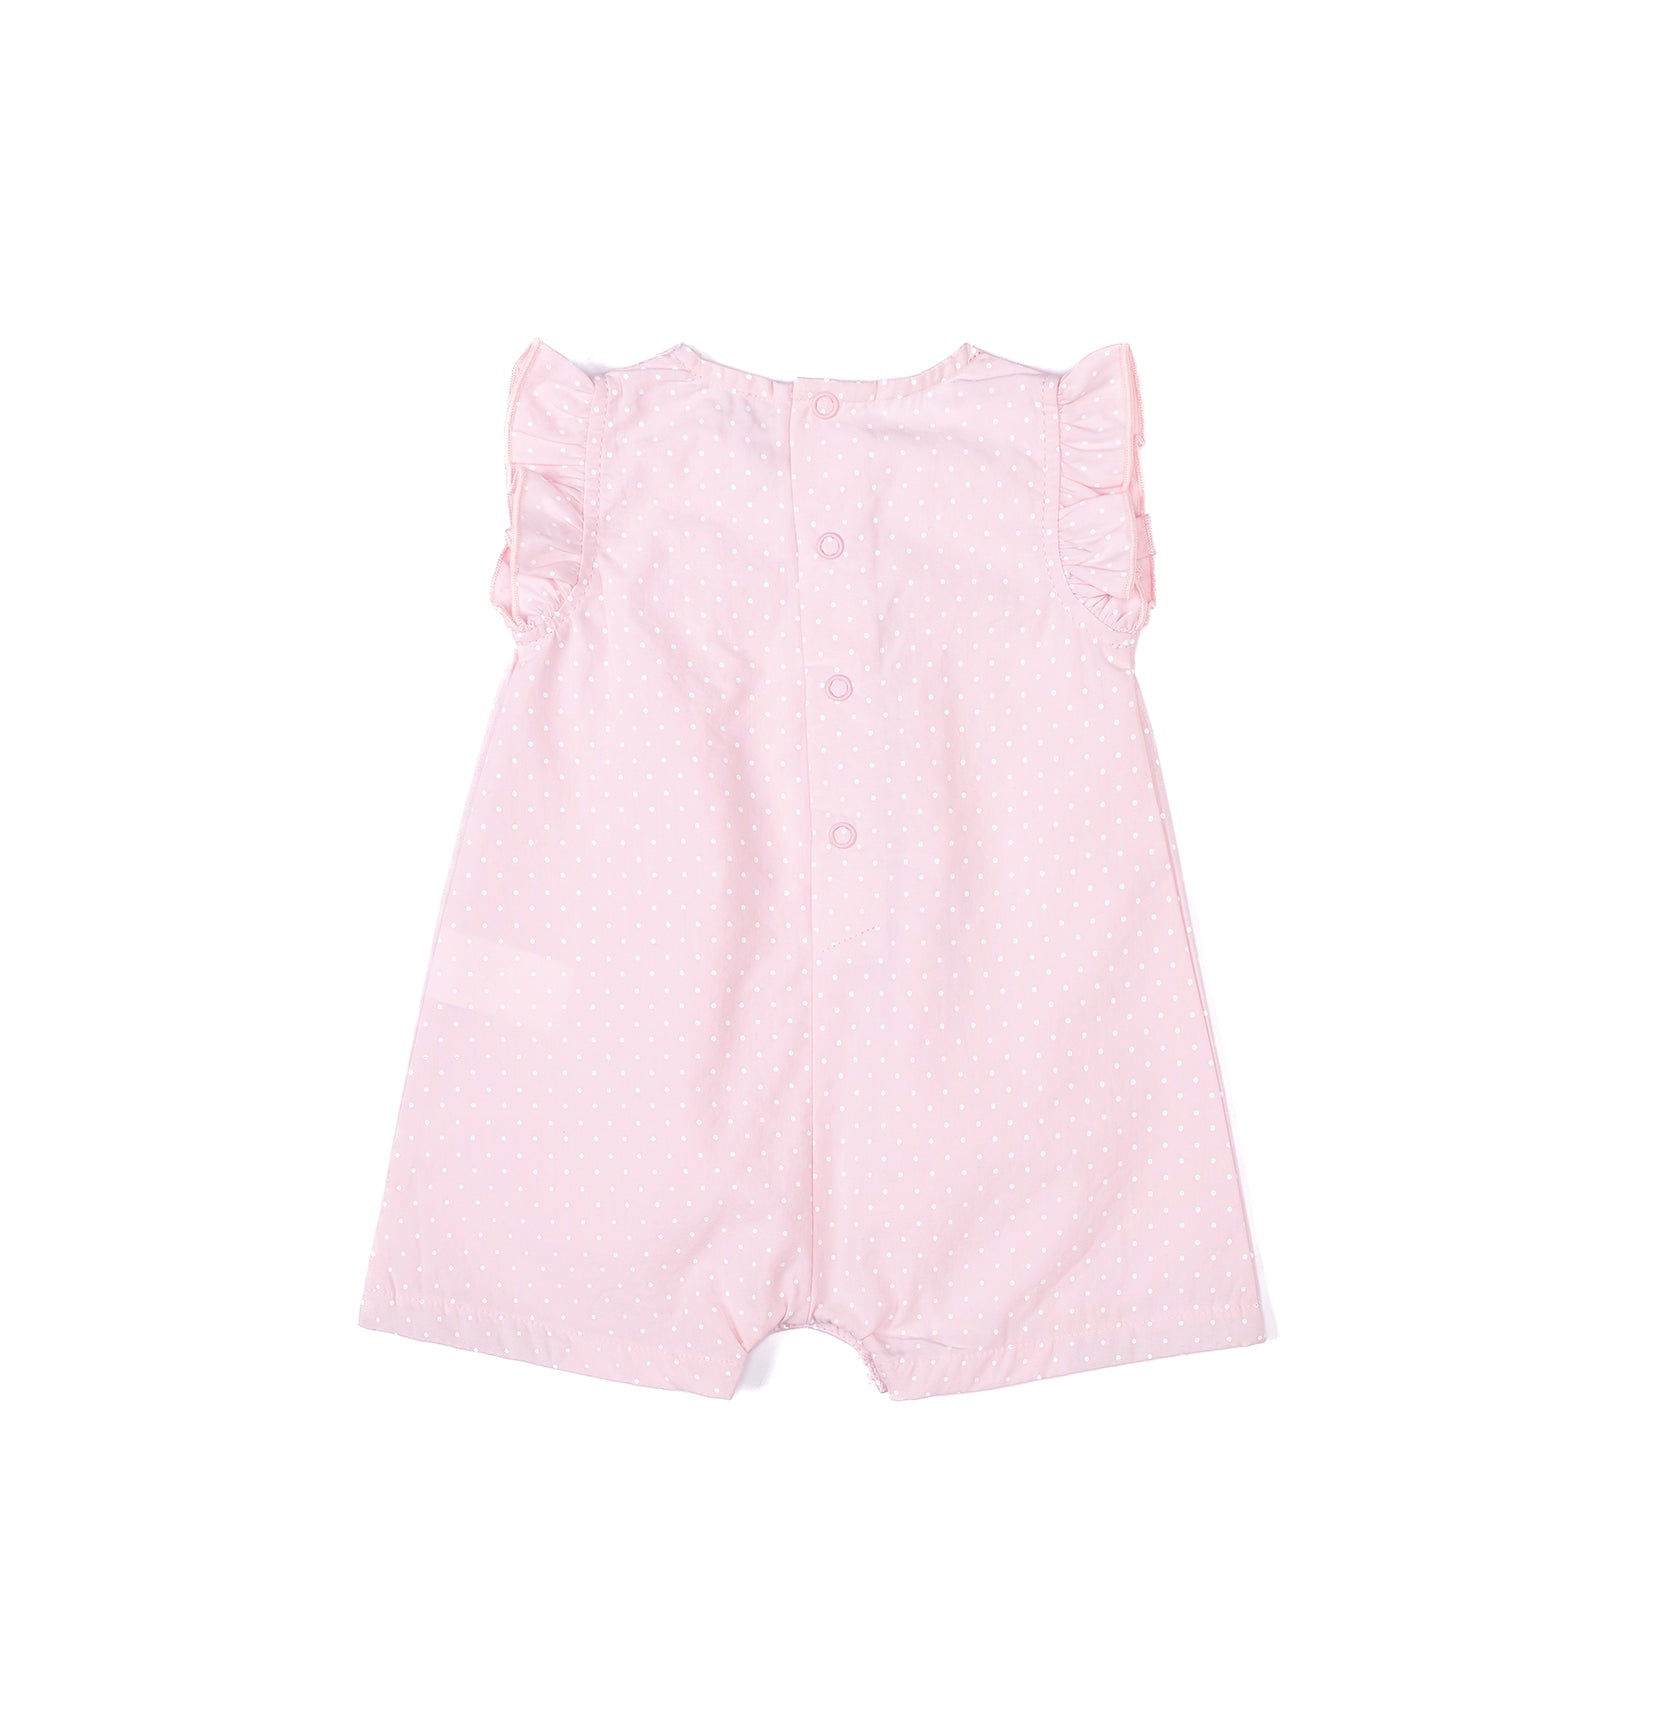 Baby girl summer cute romper by Pompelo